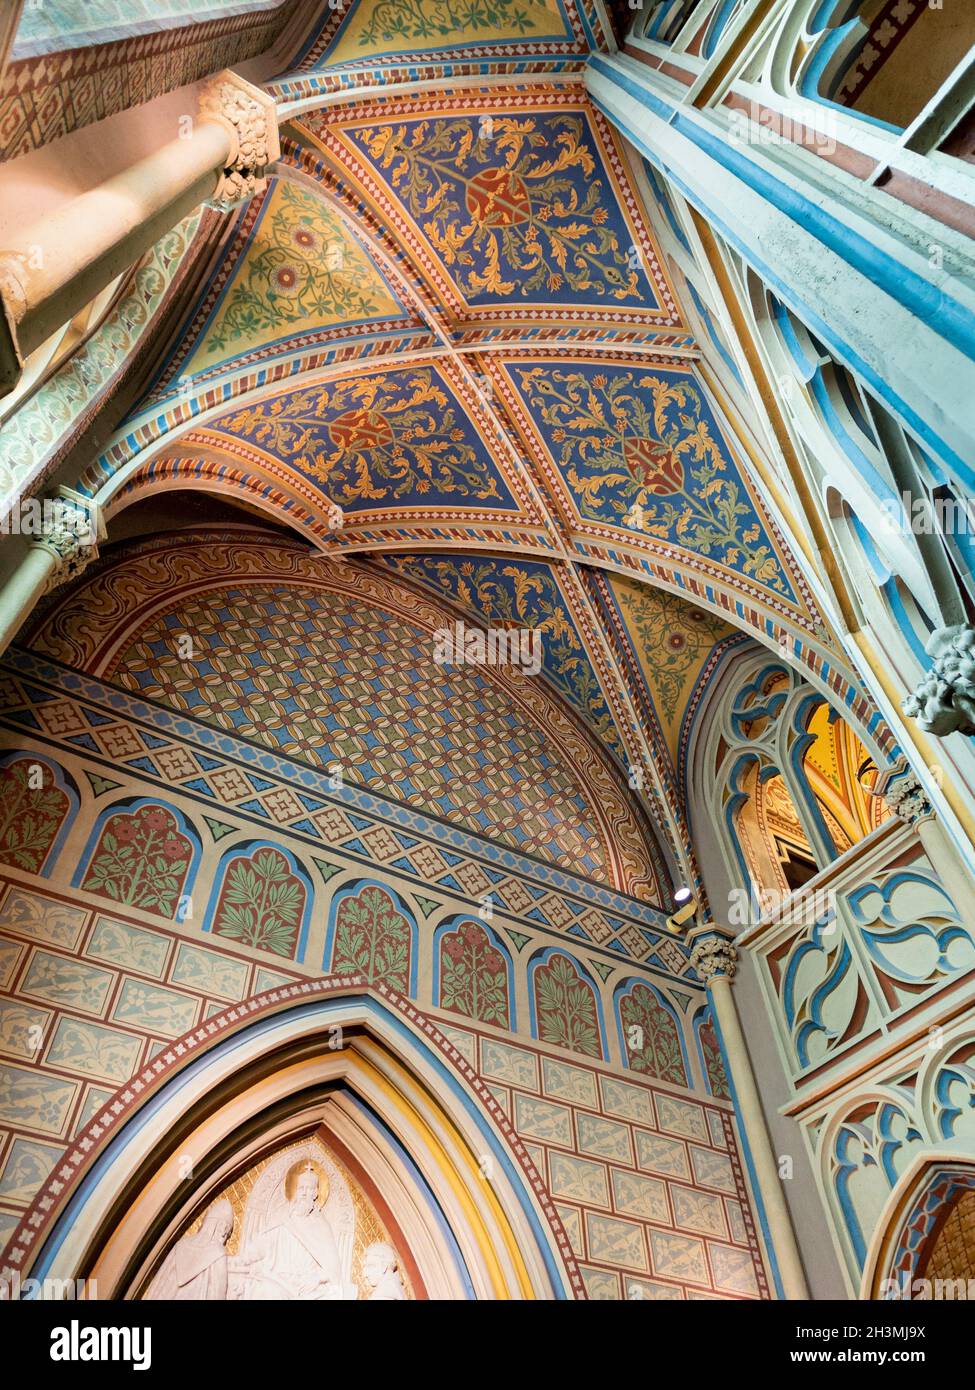 Painted Ceiling and walls of the Matthias Church: Located in Buda in the castle district this church is yet another monument to the exposition of 1896  in the Austro-Hungarian Empire. Stock Photo